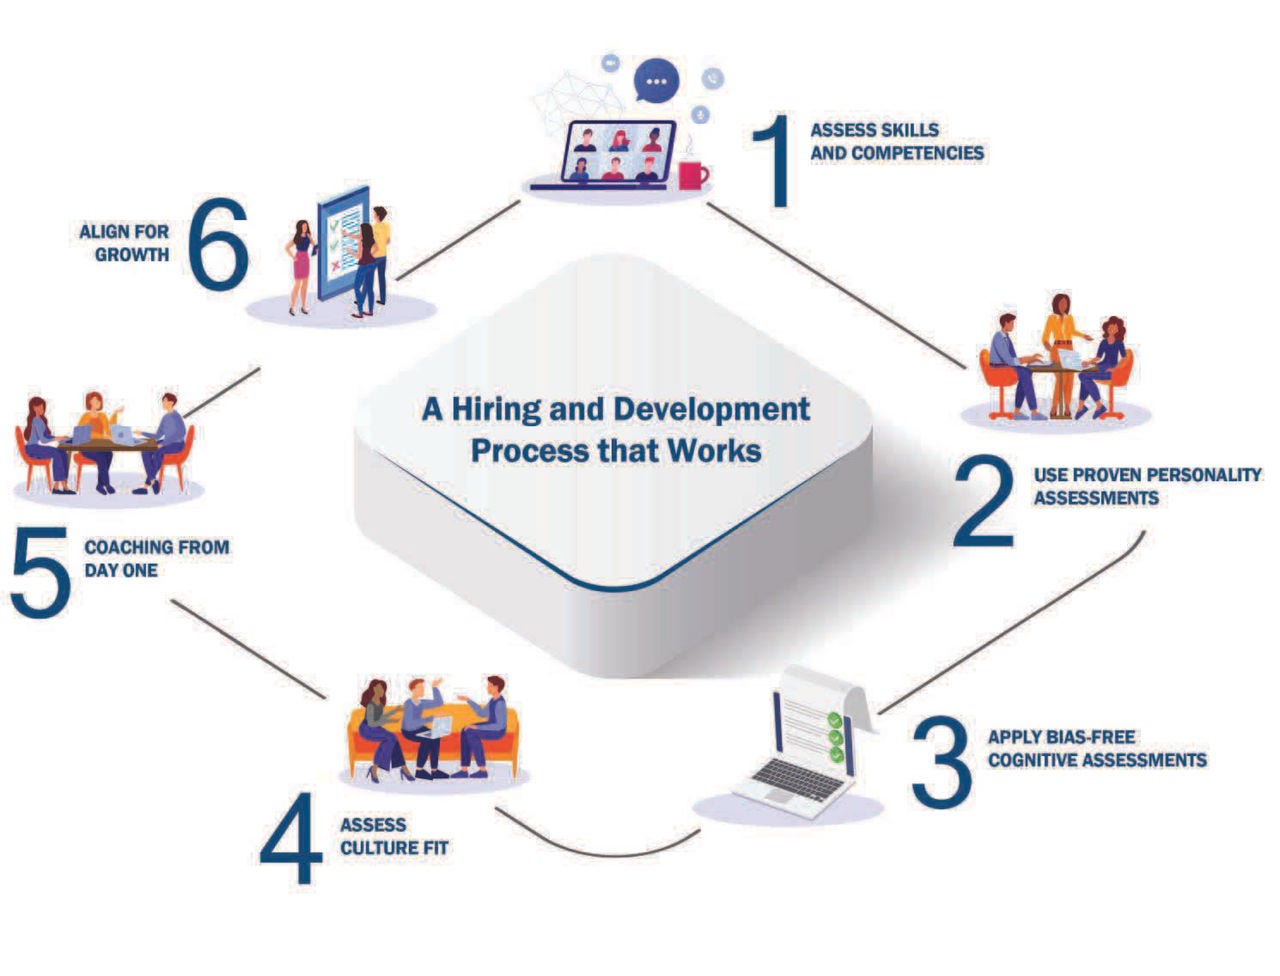 A Hiring and Development Process That Works infographic